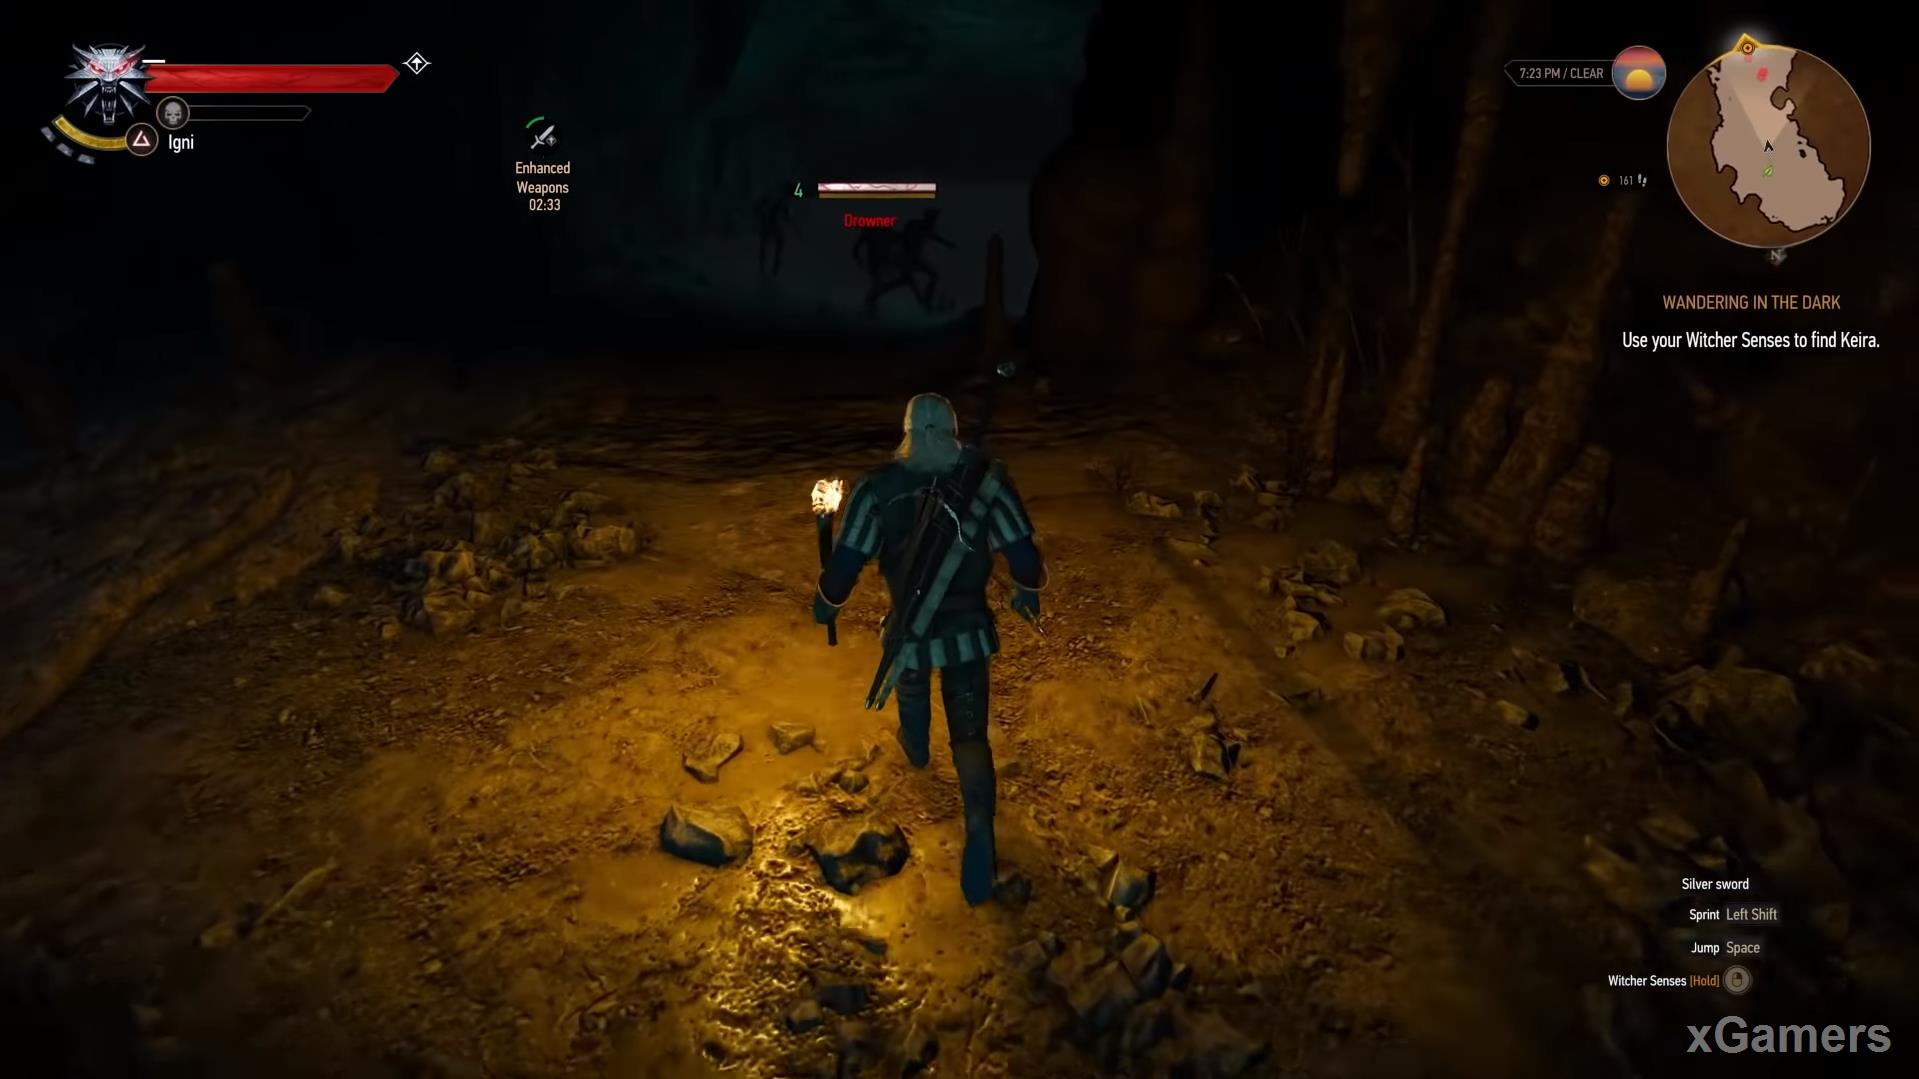 In cave Geralt meets three level 4 Drowners